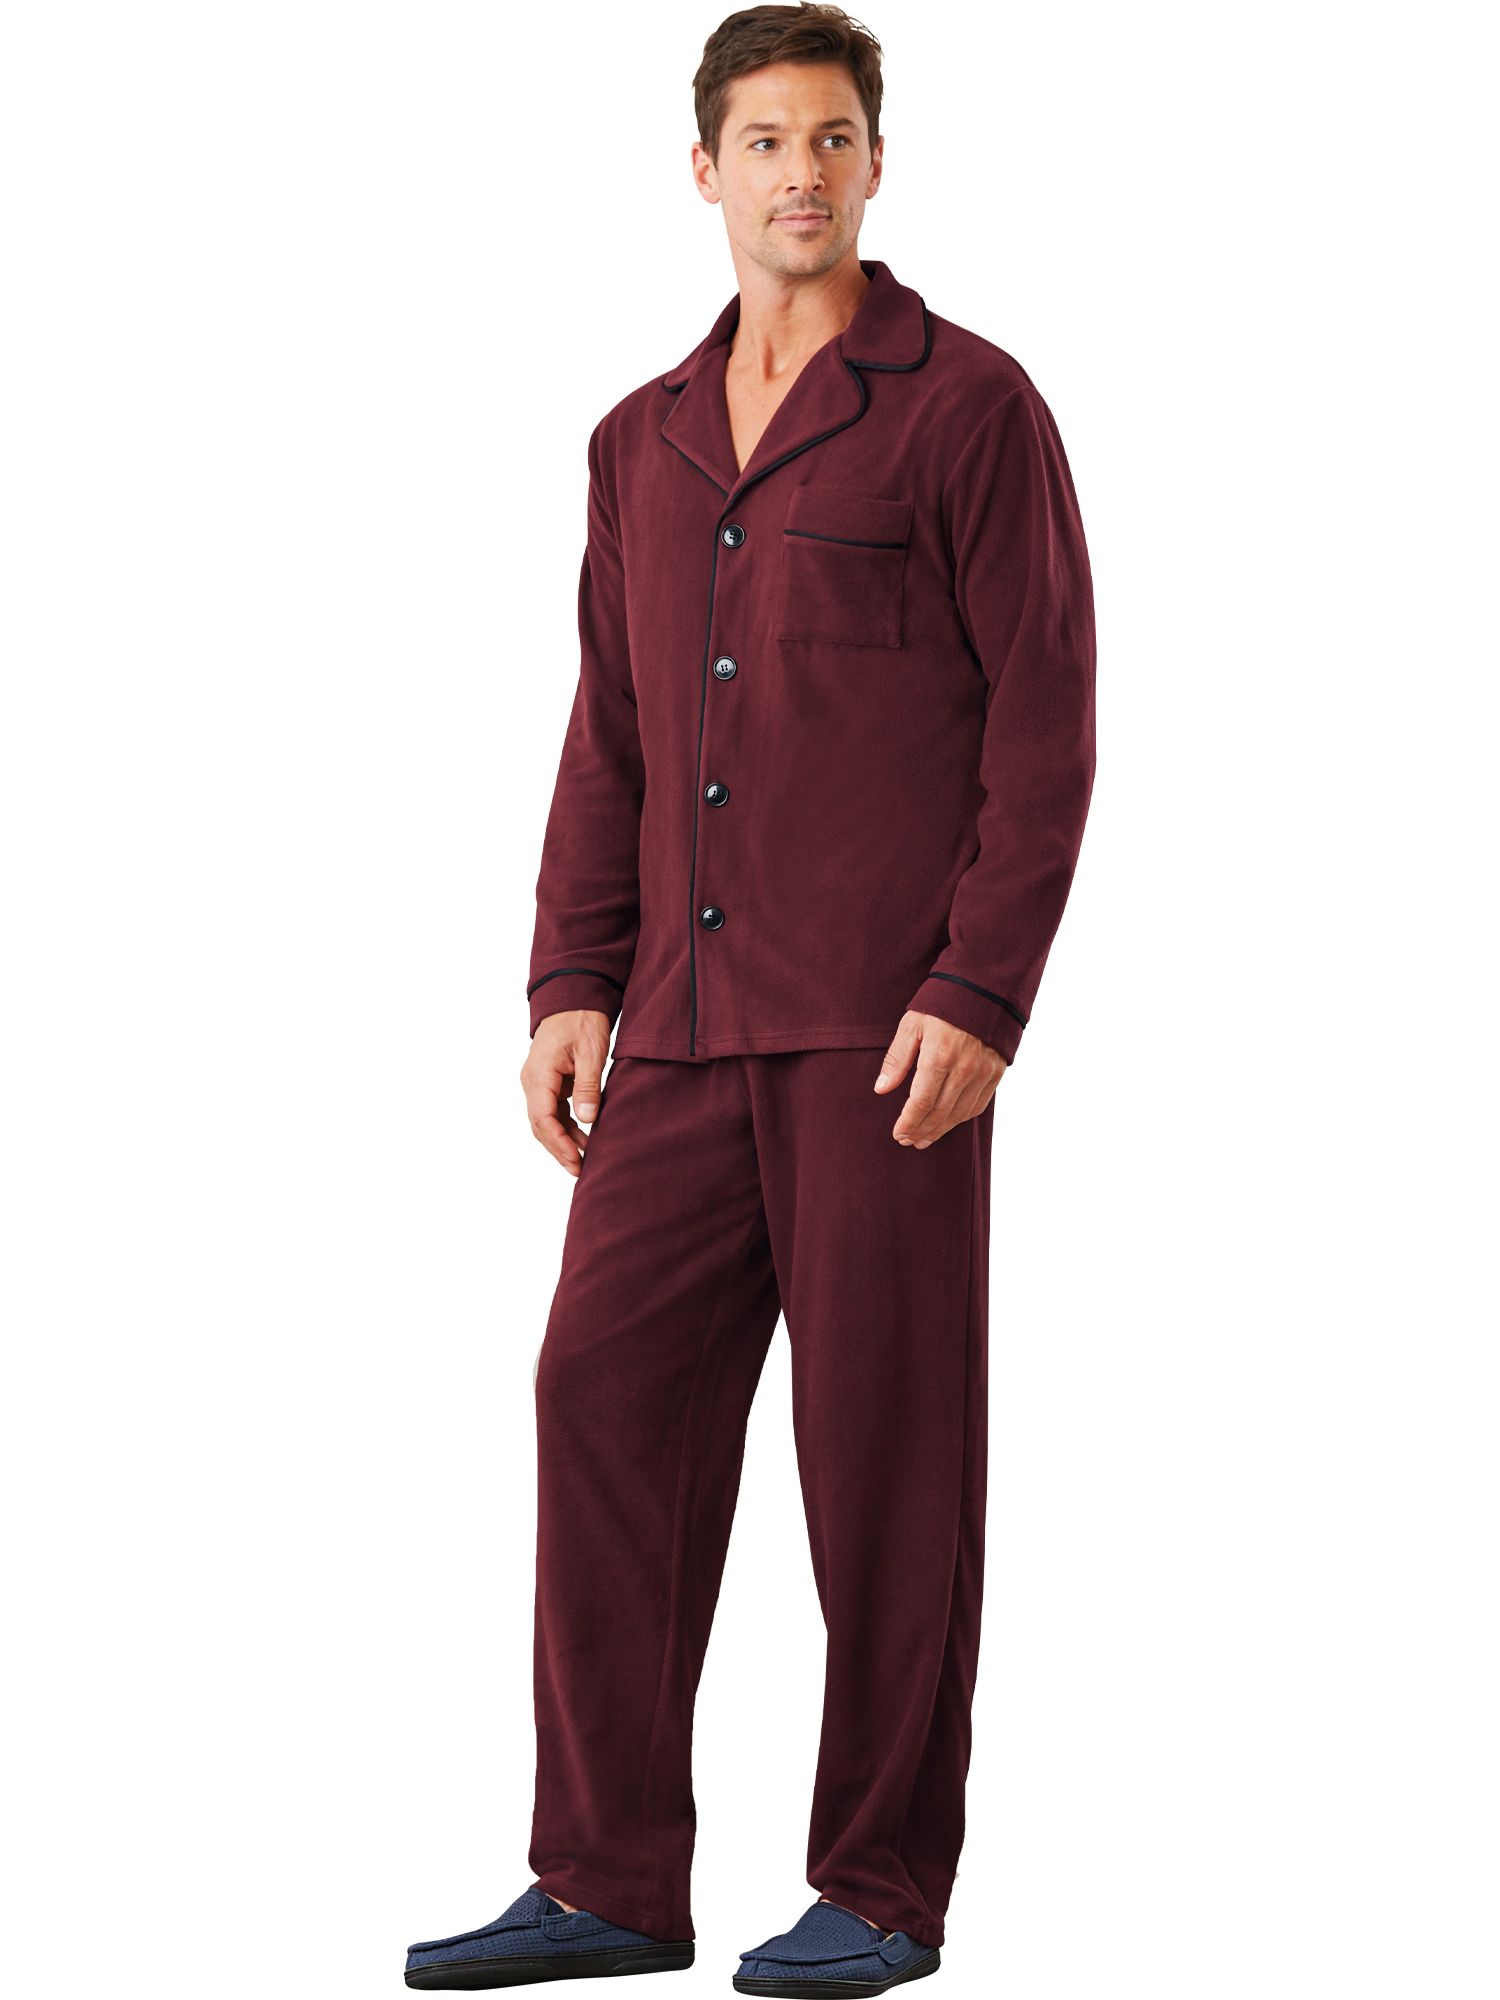 Details about   Hanes Woven Pants Long Sleeve Top 2 Piece Pajama PJ Set Mens Size Small NWT